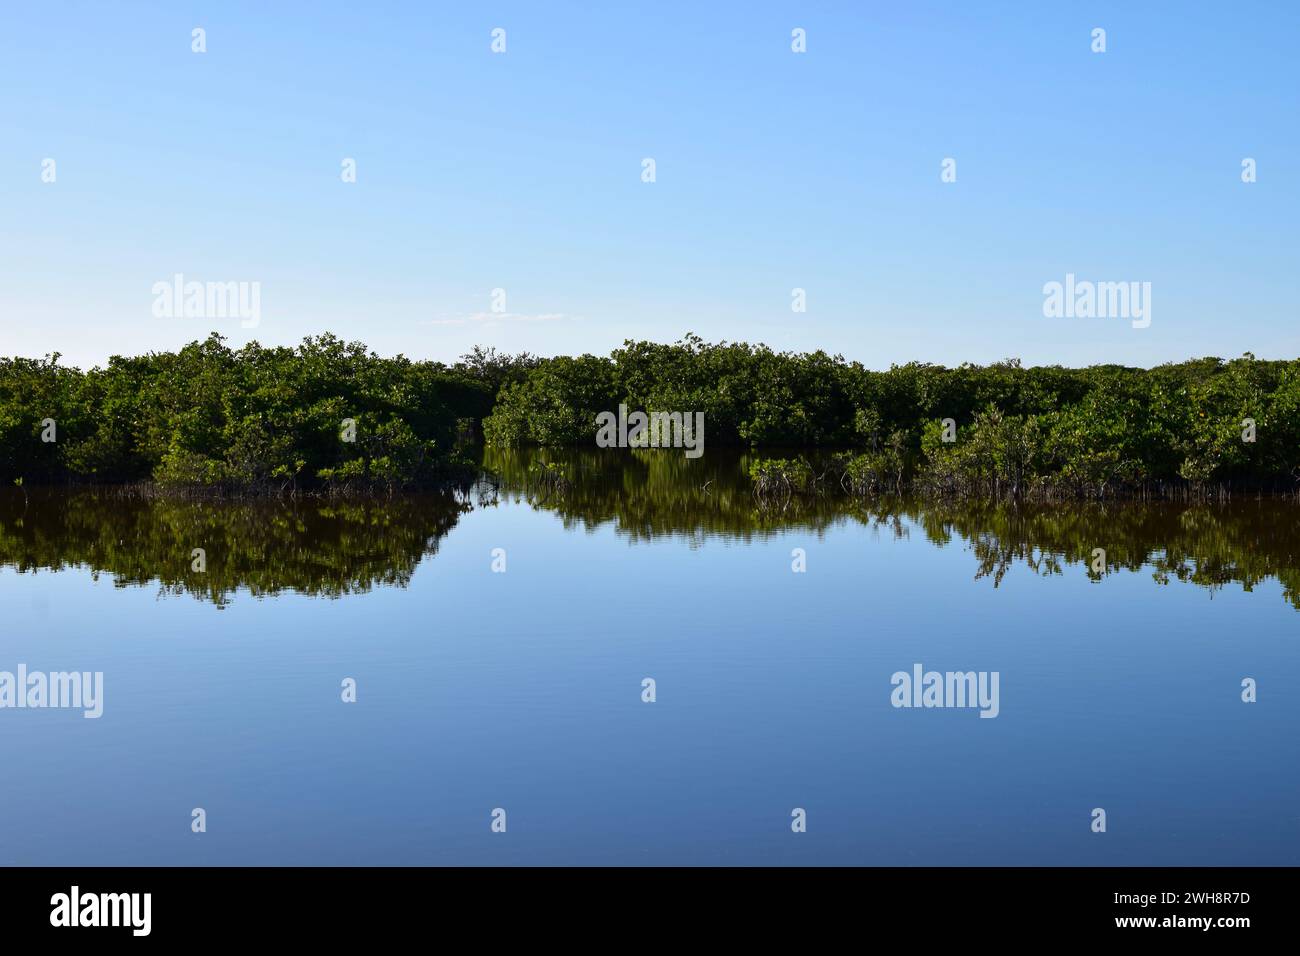 A view of the mangrove in San Pedro, Ambergris caye, Belize, Central America. Stock Photo